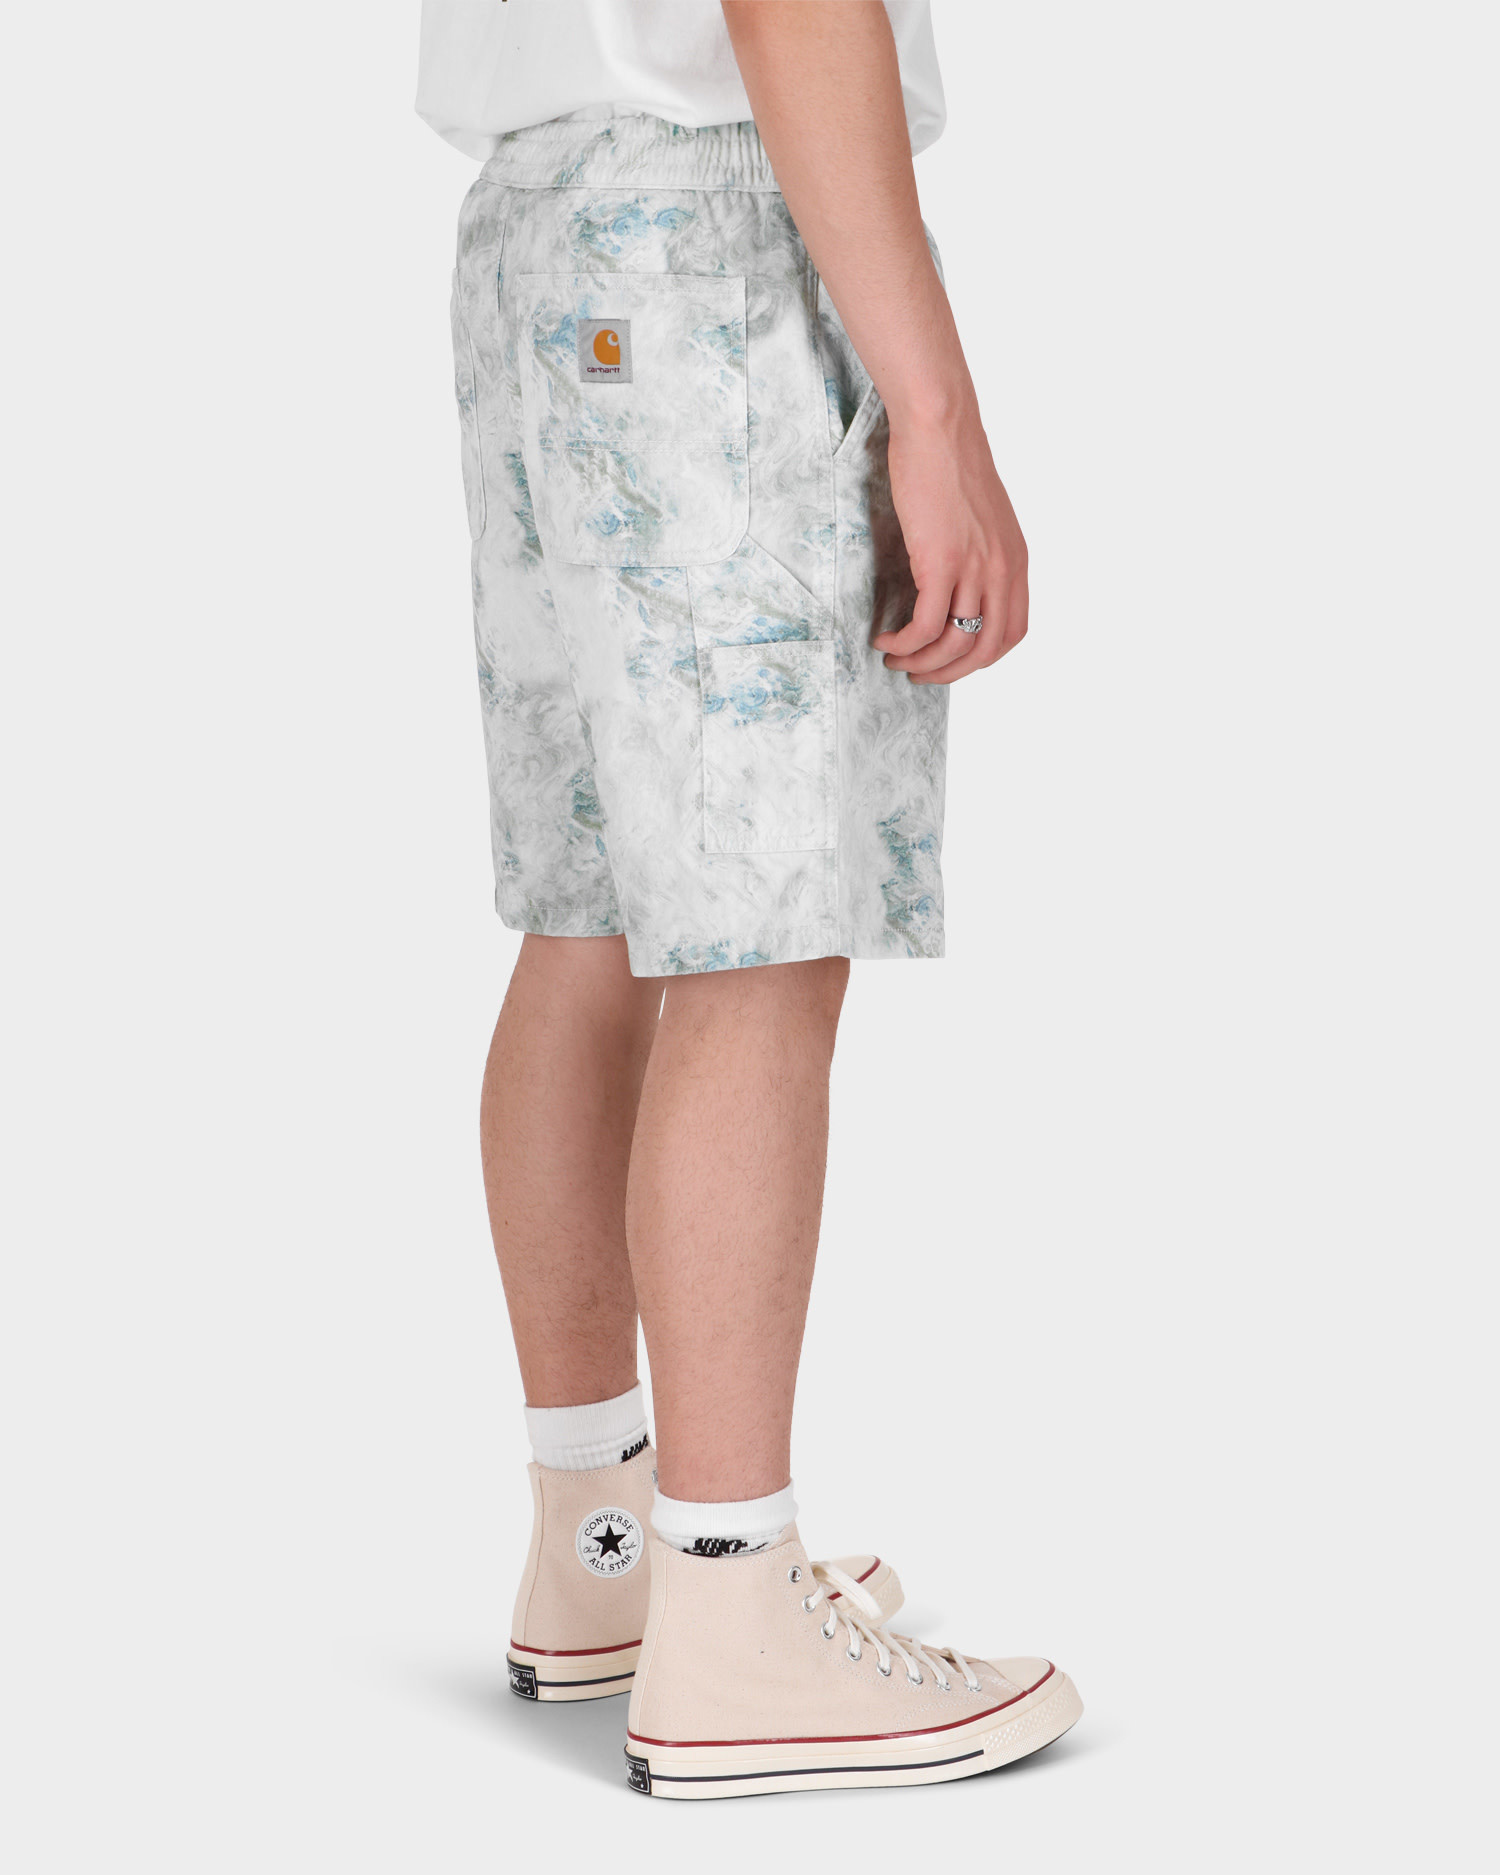 Carhartt Marble Shorts Marble Print Wave Stone Washed